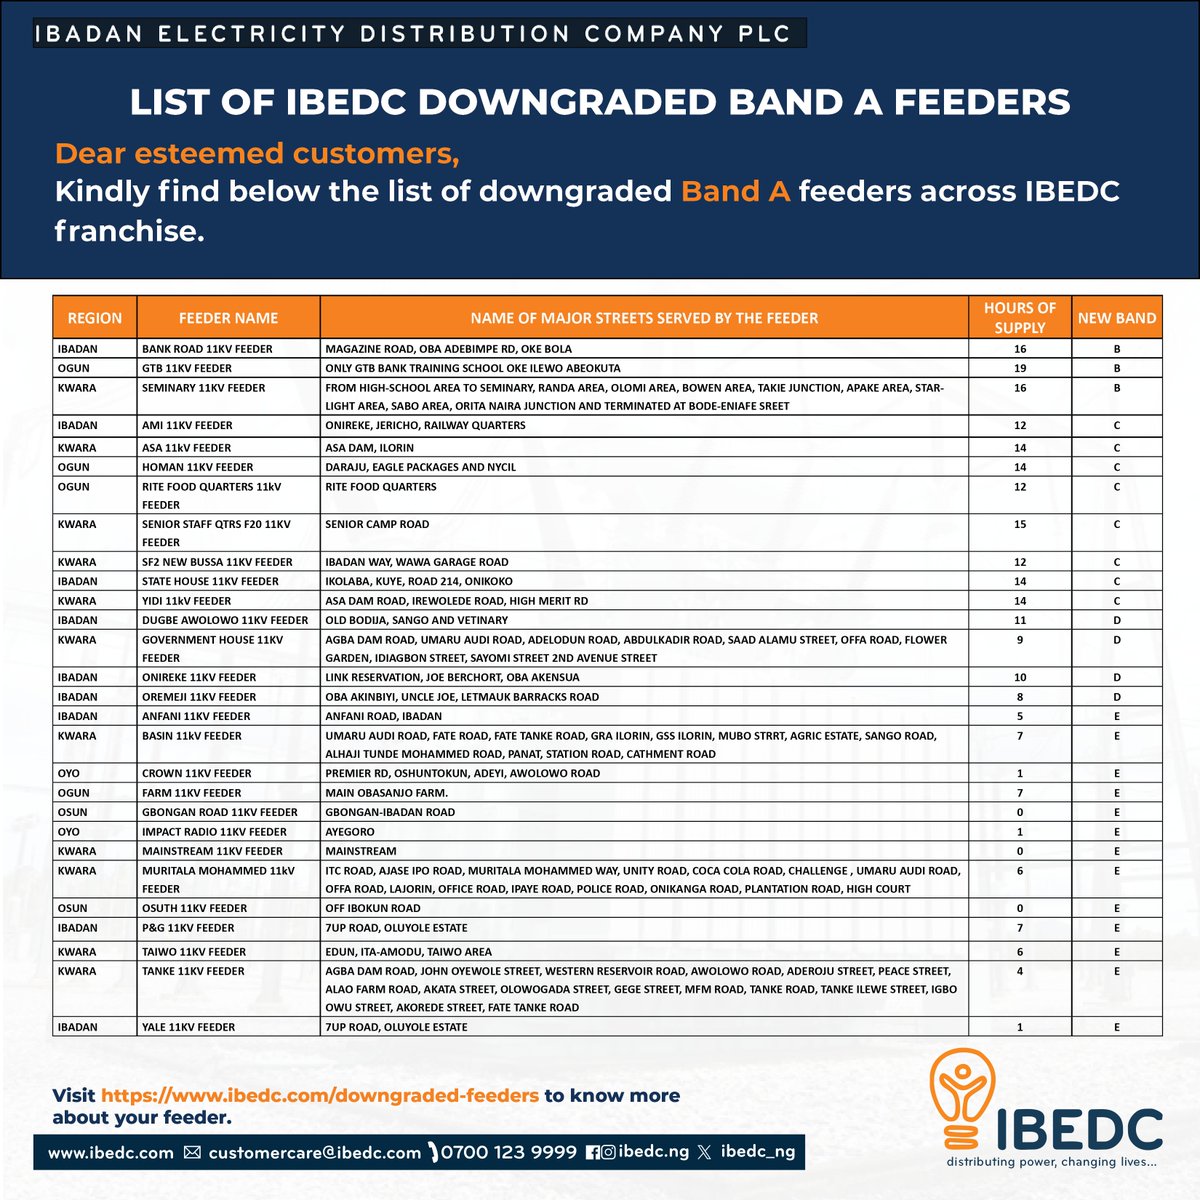 List of IBEDC's downgraded band A feeders including their hours of supply. Visit ibedc.com/downgraded-fee… to know more about your feeder details #ibedc #ibedctariff